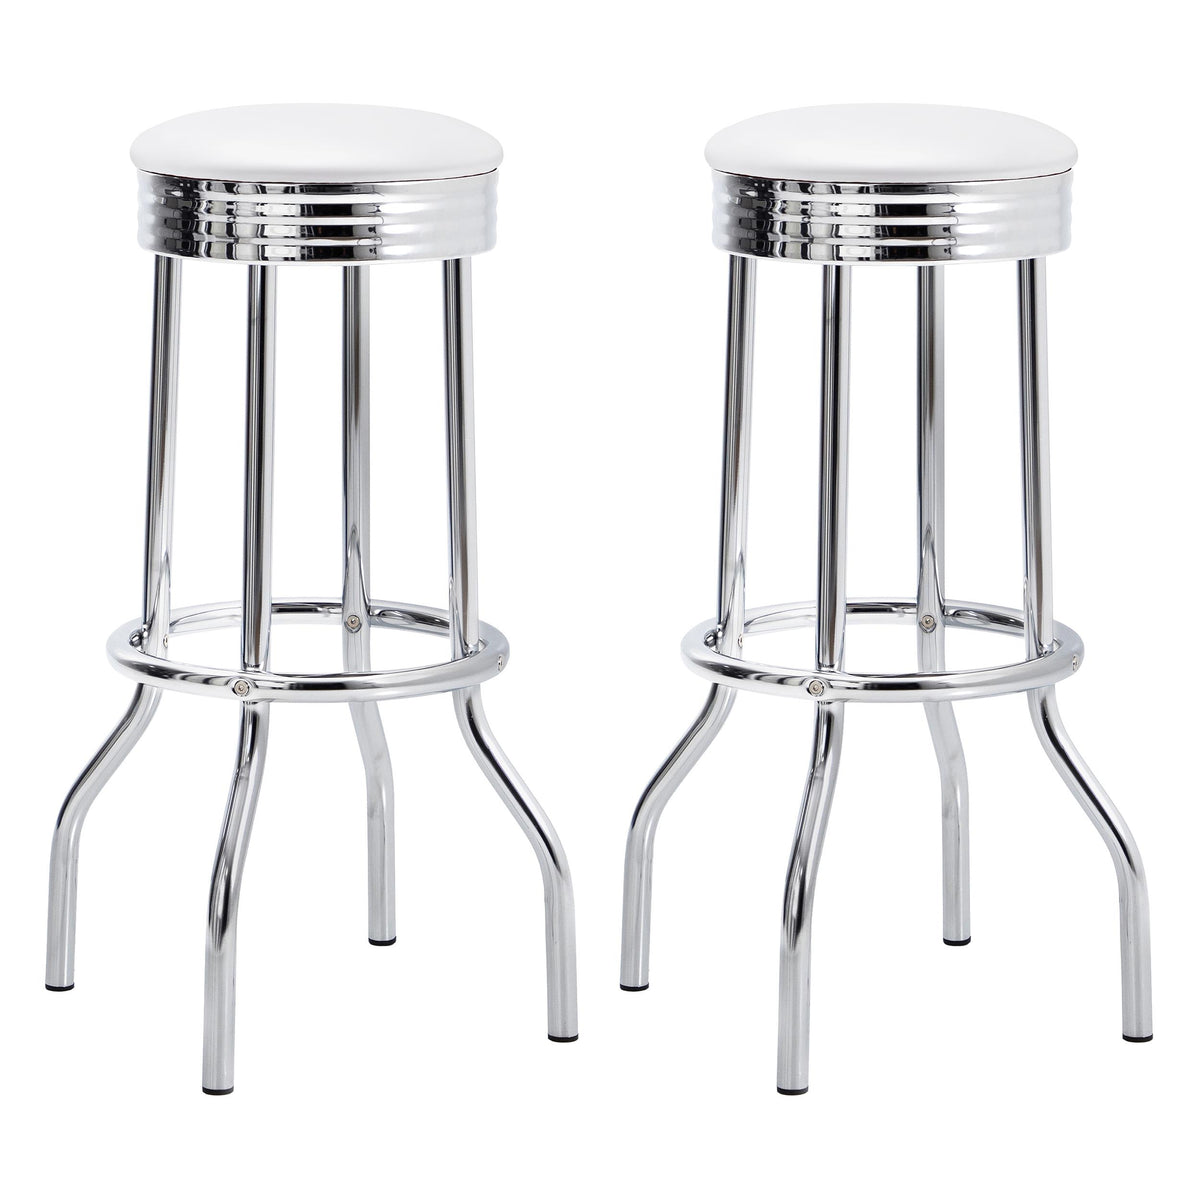 Theodore Upholstered Top Bar Stools White and Chrome (Set of 2)  Las Vegas Furniture Stores